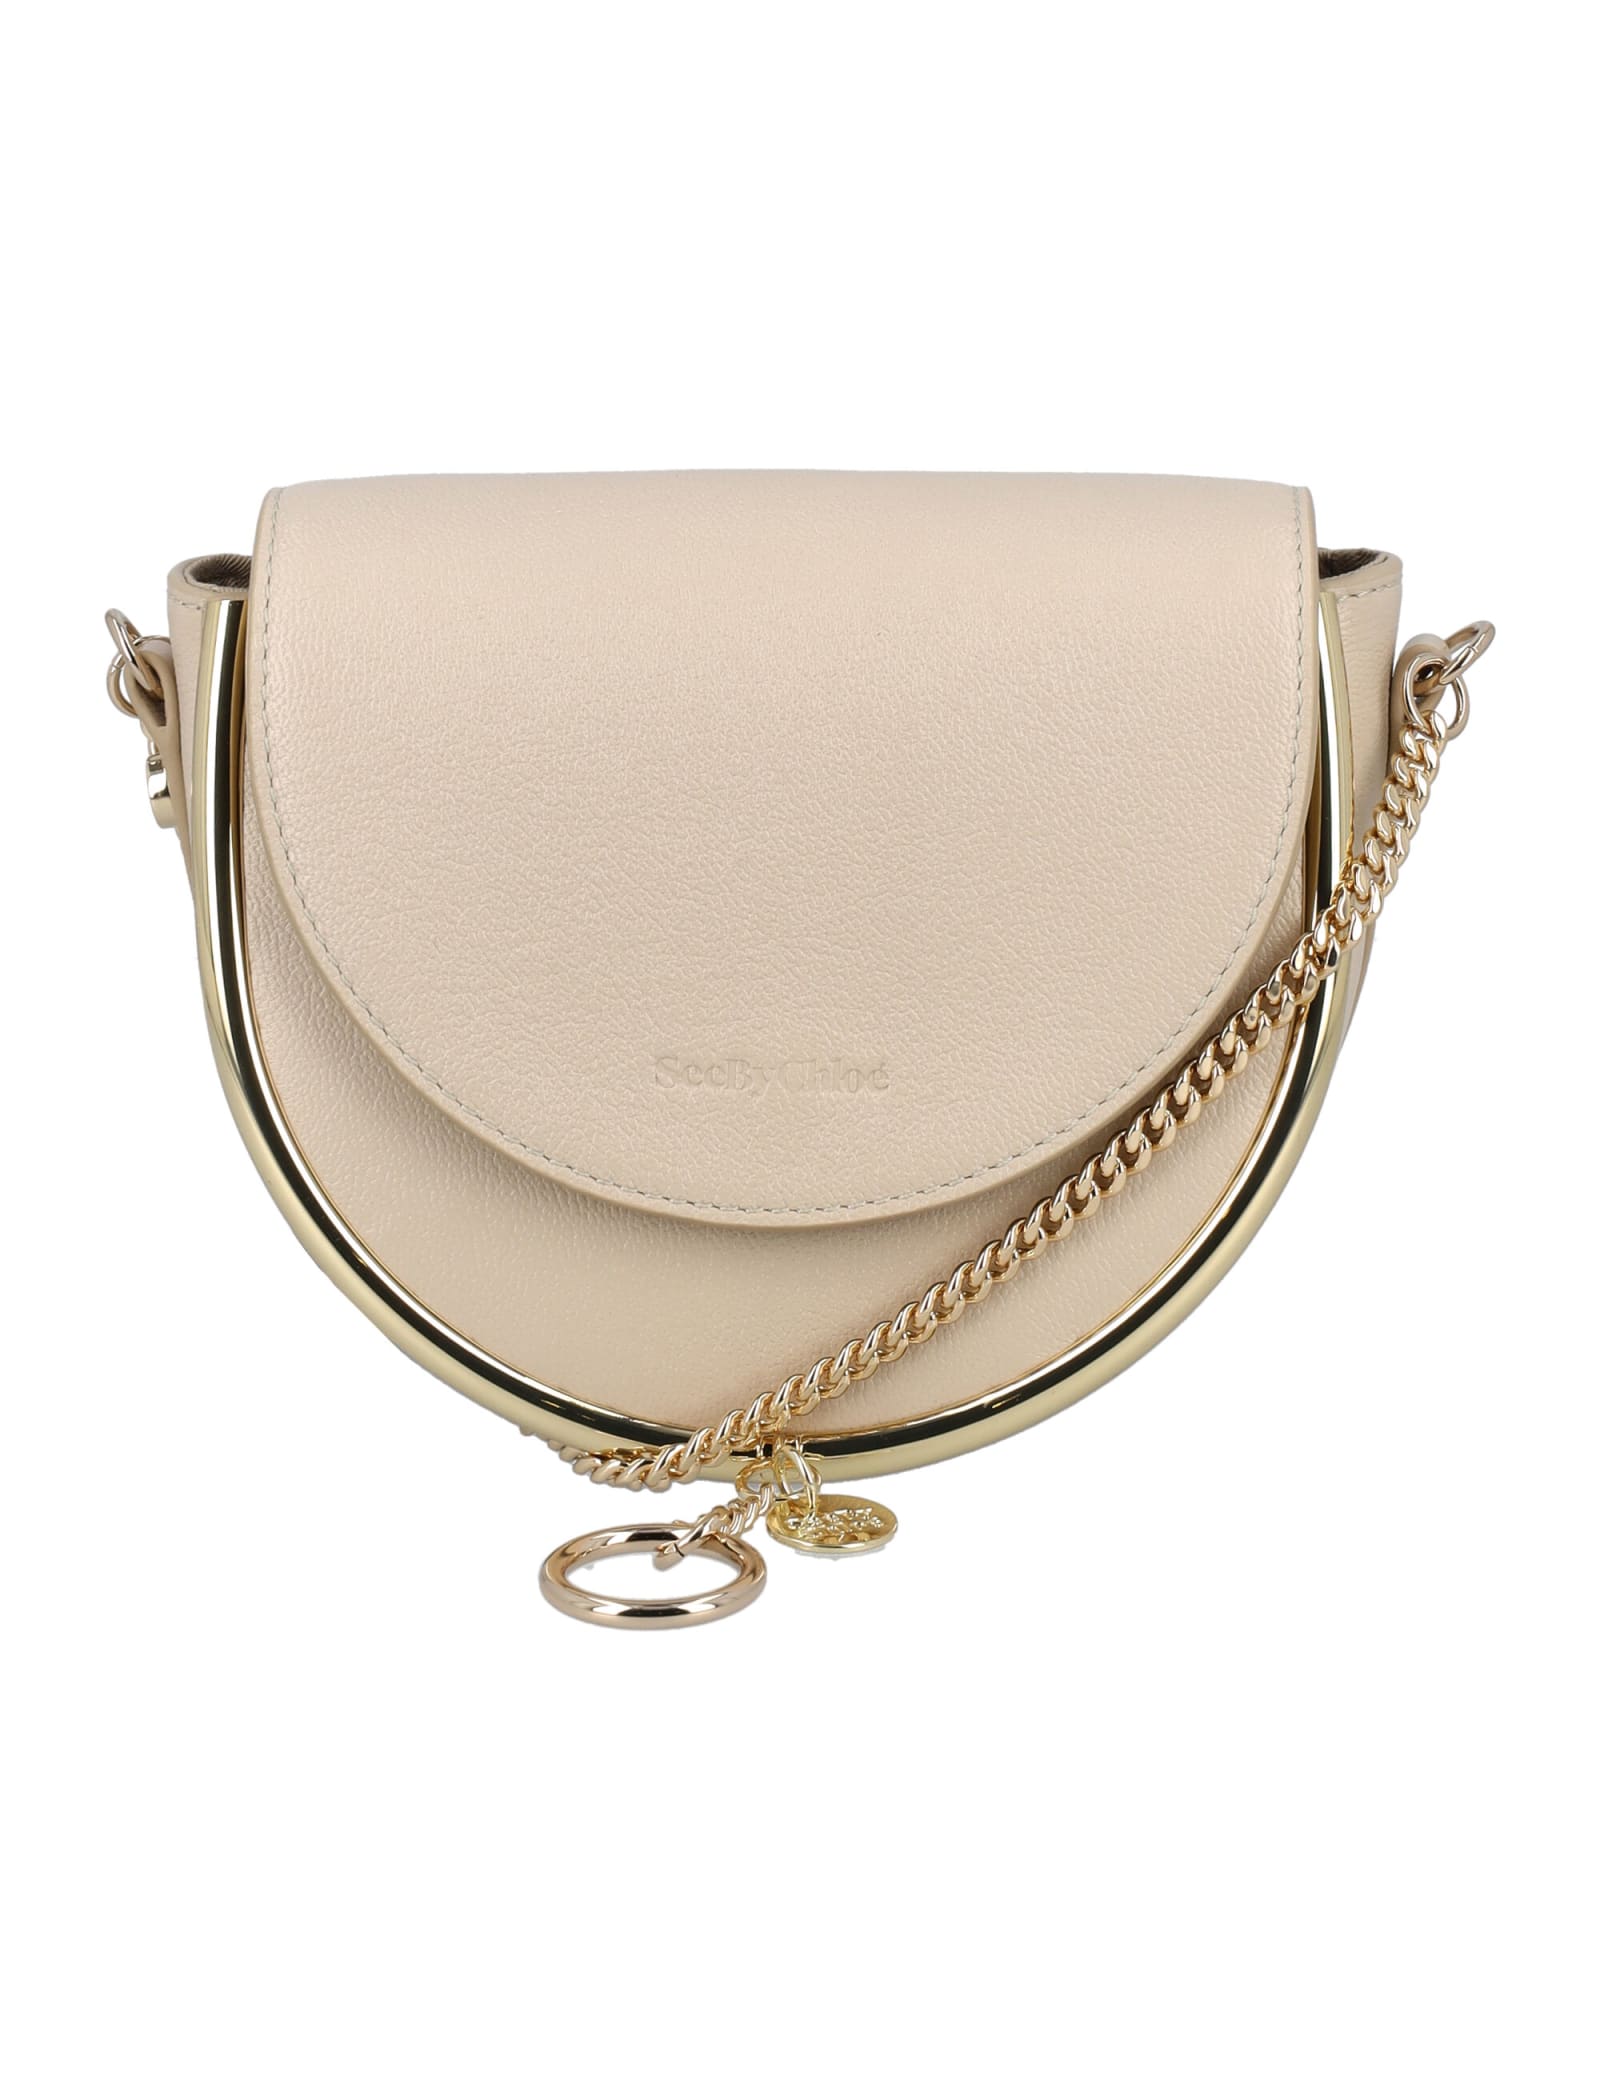 See By Chloé Mara Small Shoulder Bag In Cement Beige | ModeSens